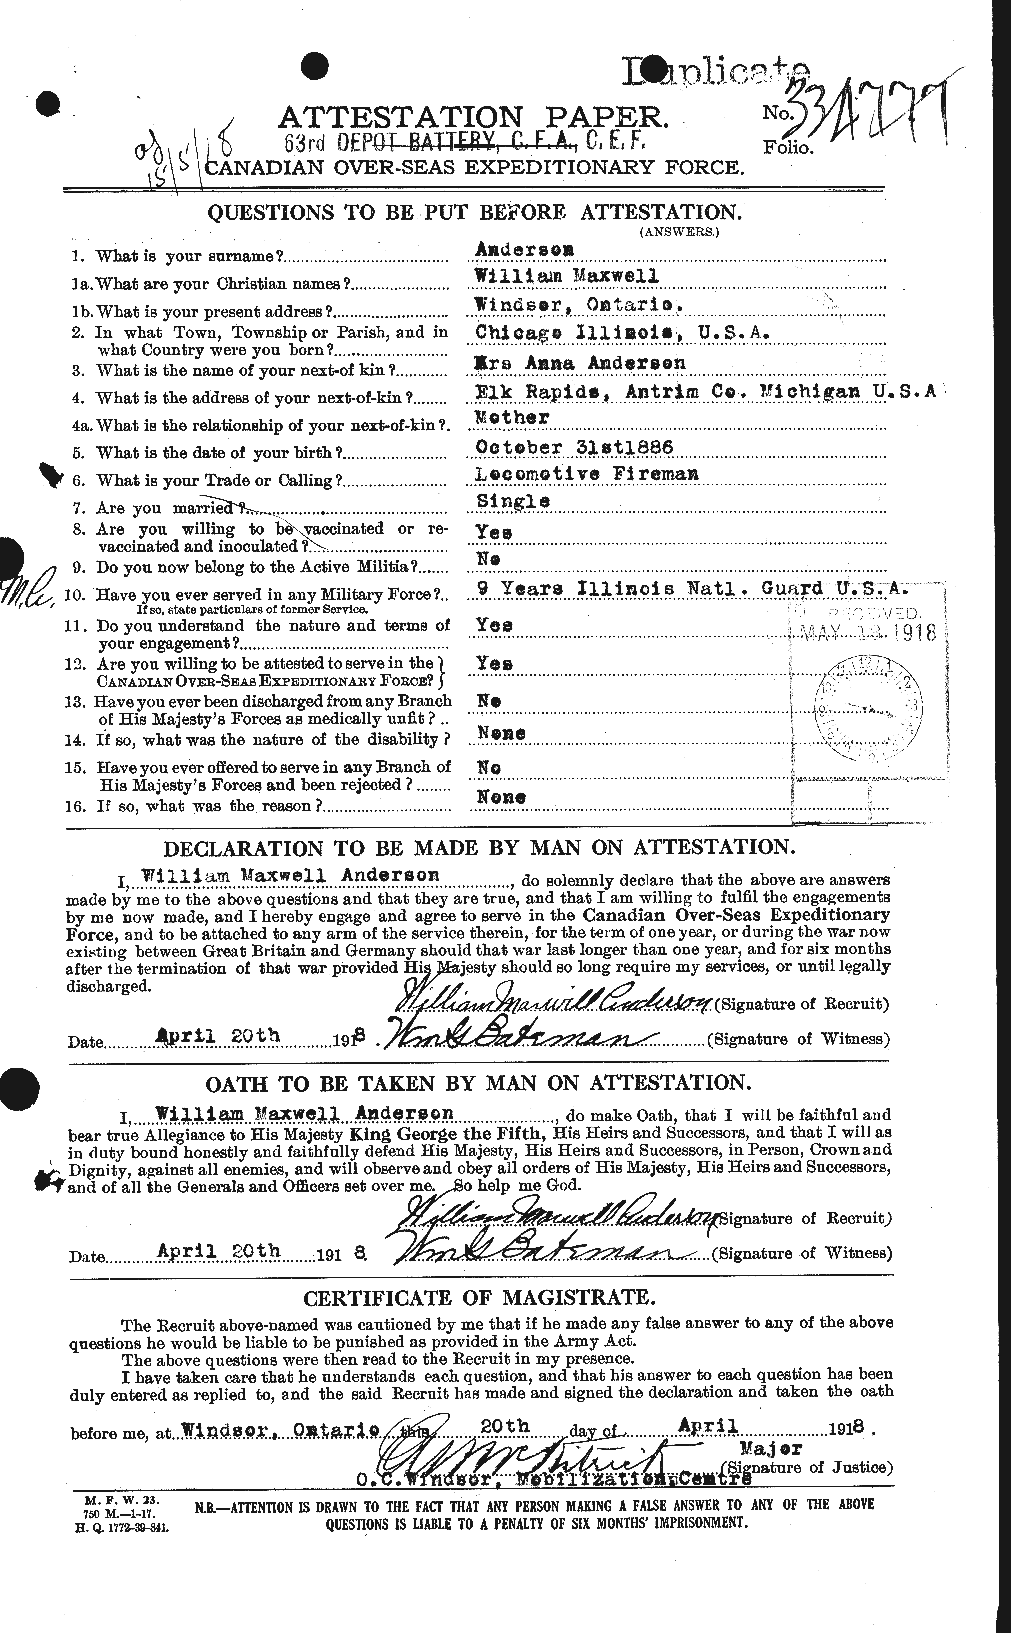 Personnel Records of the First World War - CEF 210685a